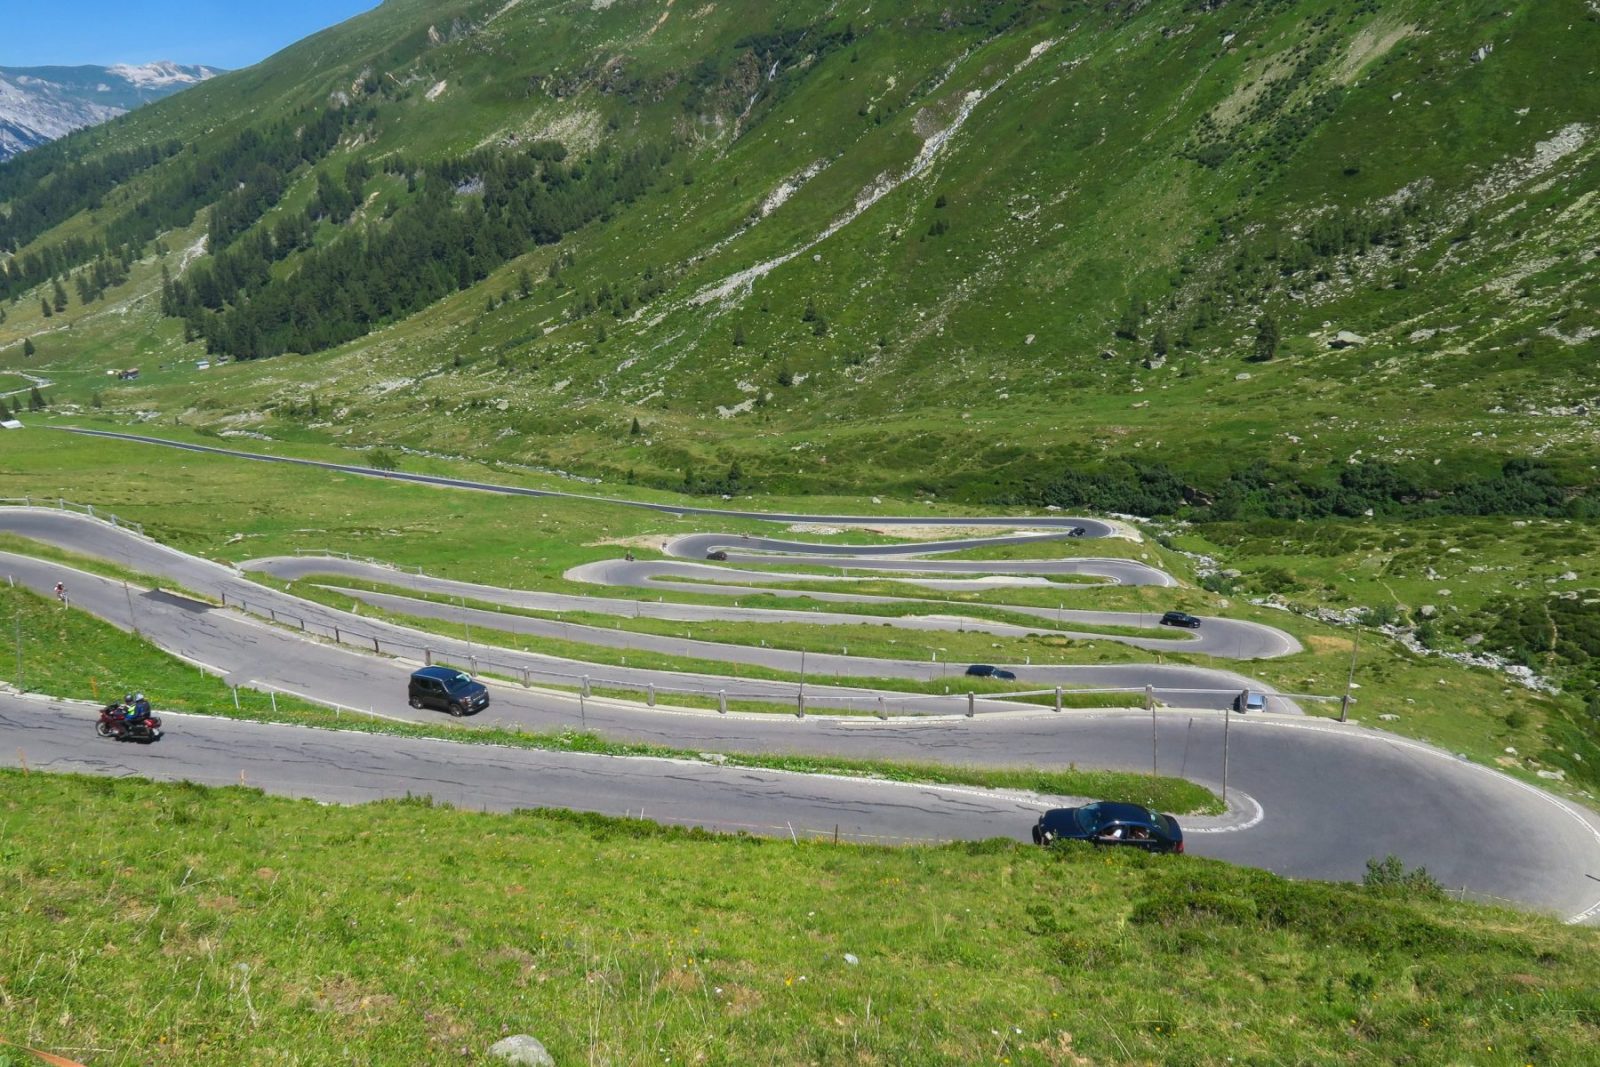 Splugenpass in Switzerland. Driving to the Mountains. How to have a no-contact drive to your summer holiday. Photo: Daniele Levis Pelusi. Unsplash.